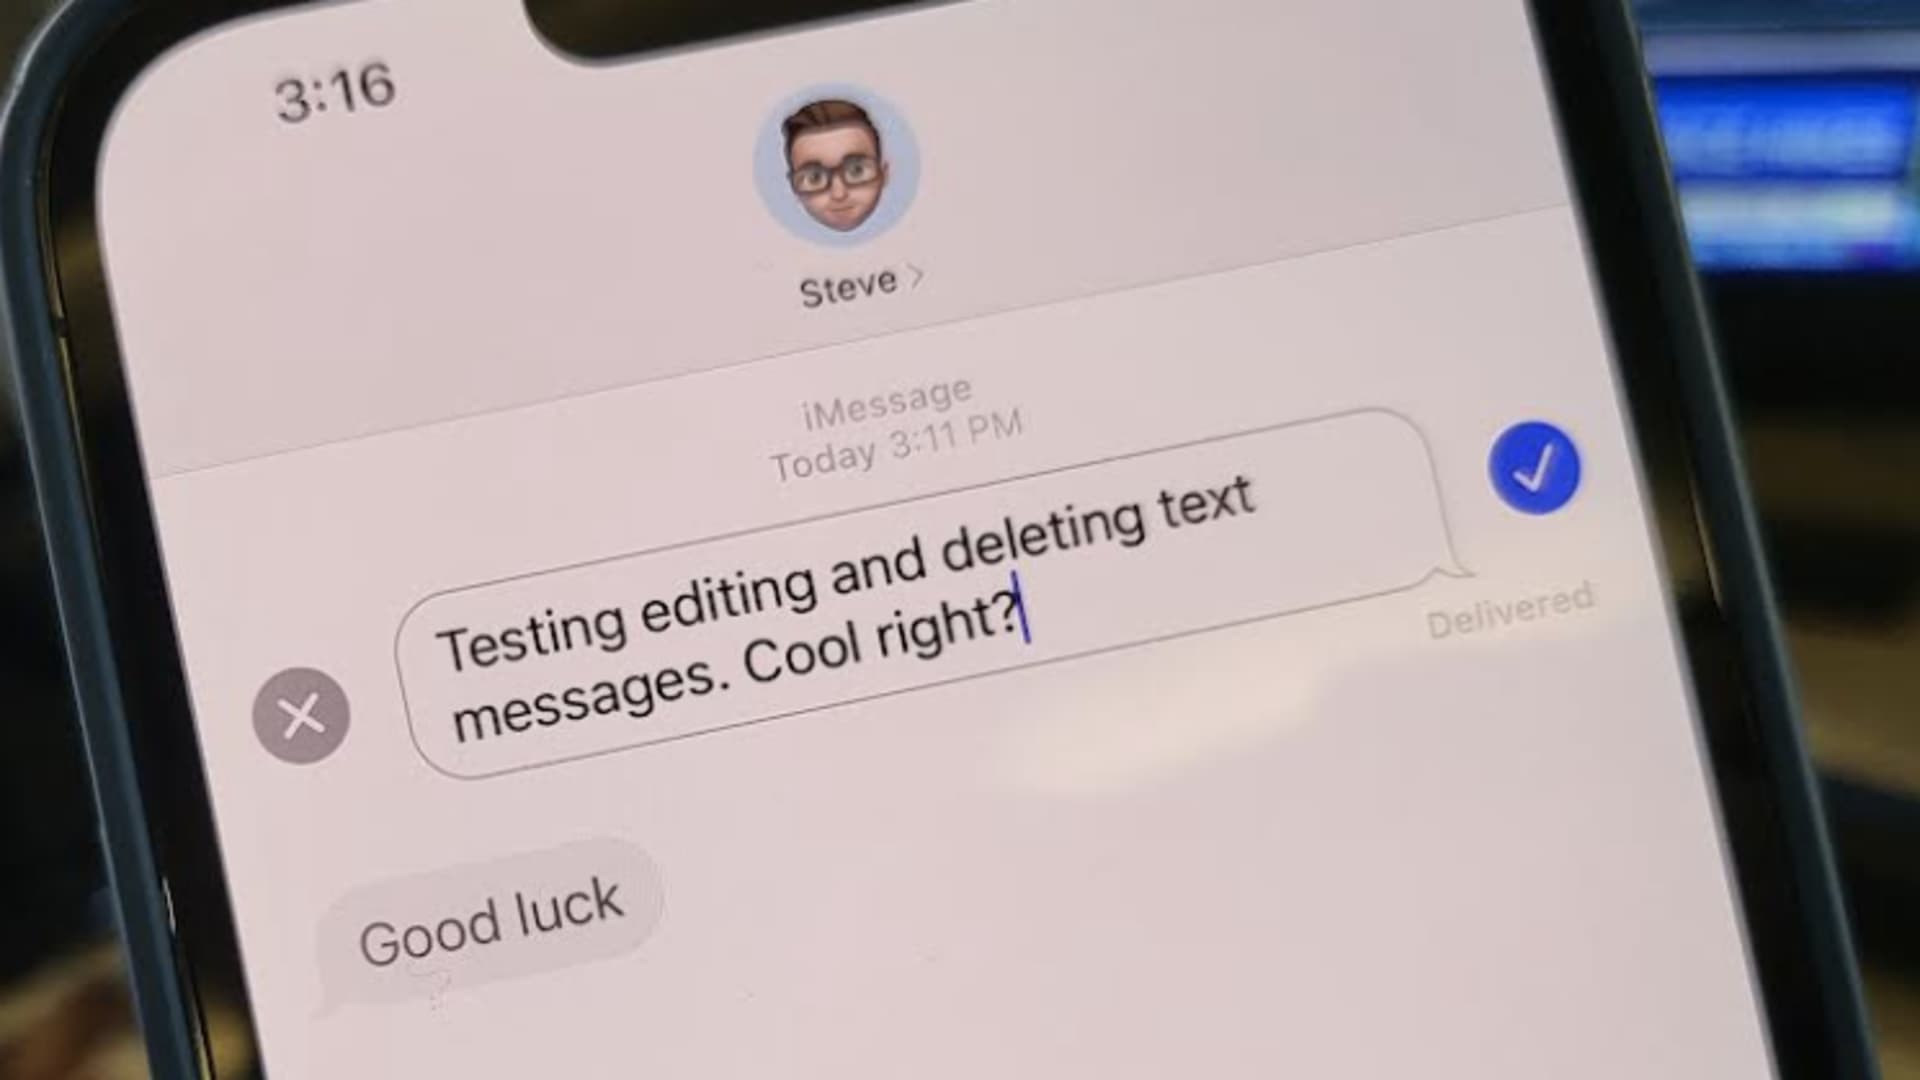 How to edit or unsend an iMessage on iPhone